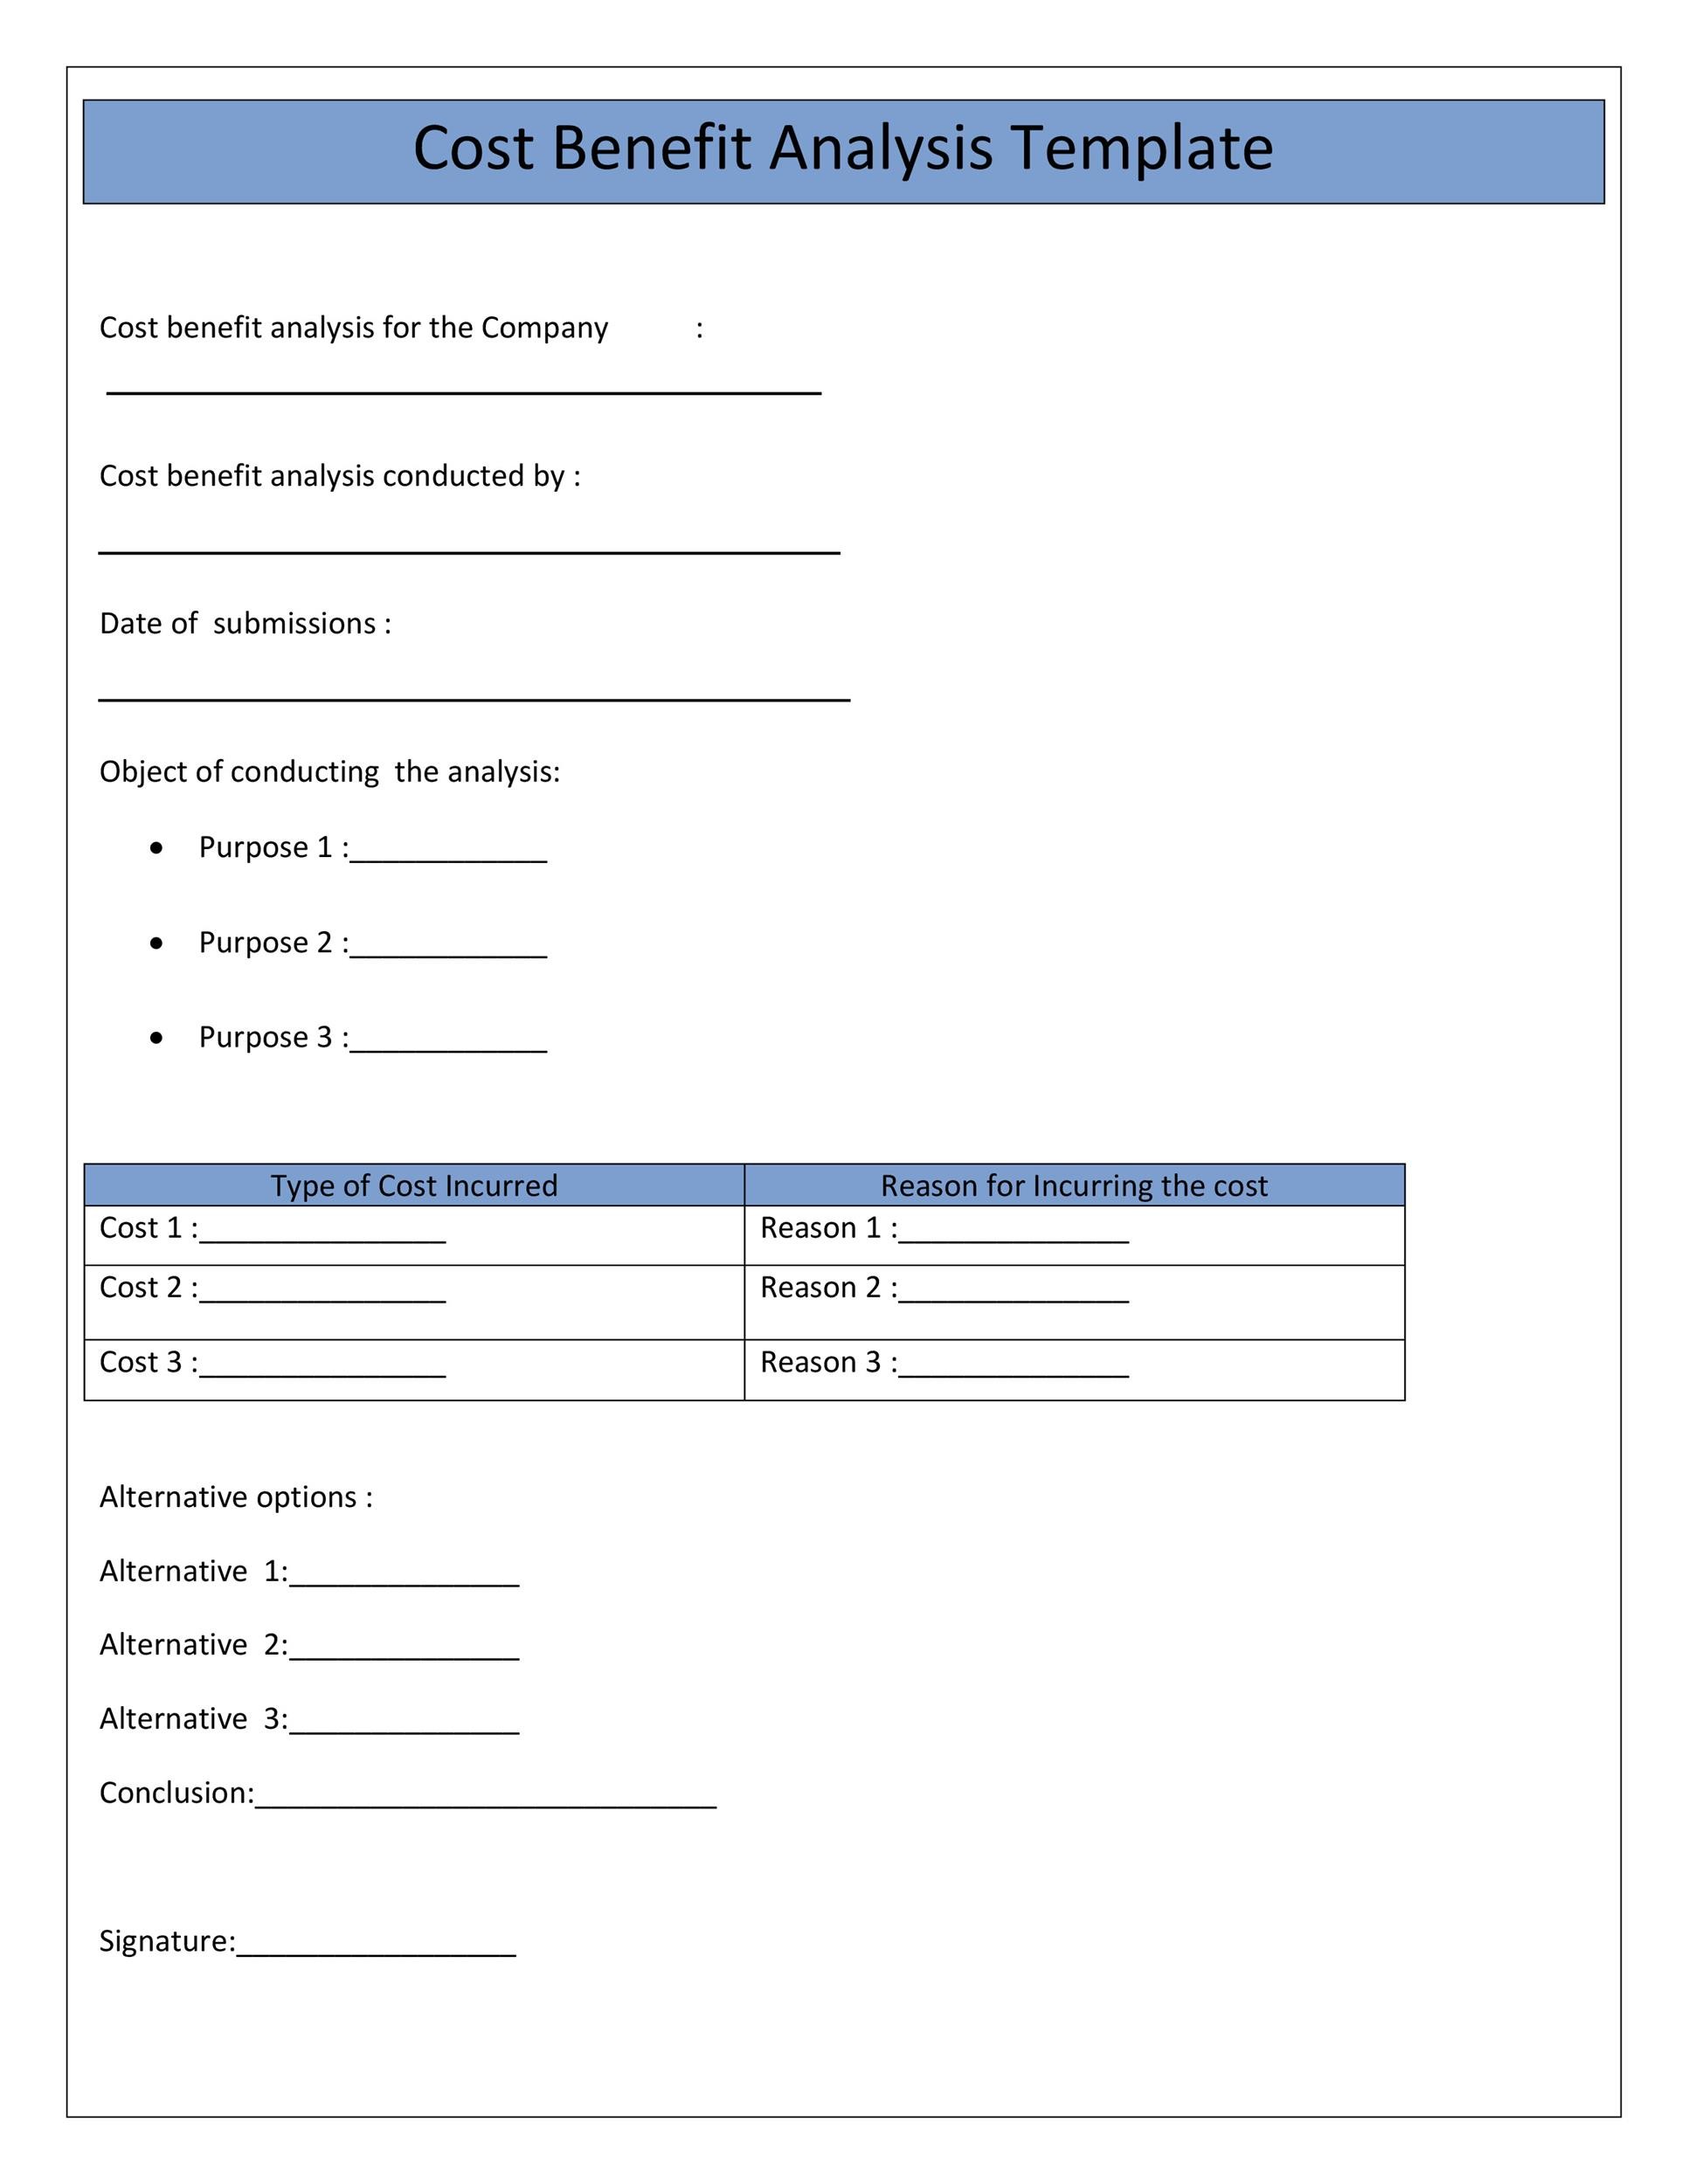 Free Cost Benefit Analysis Template 04